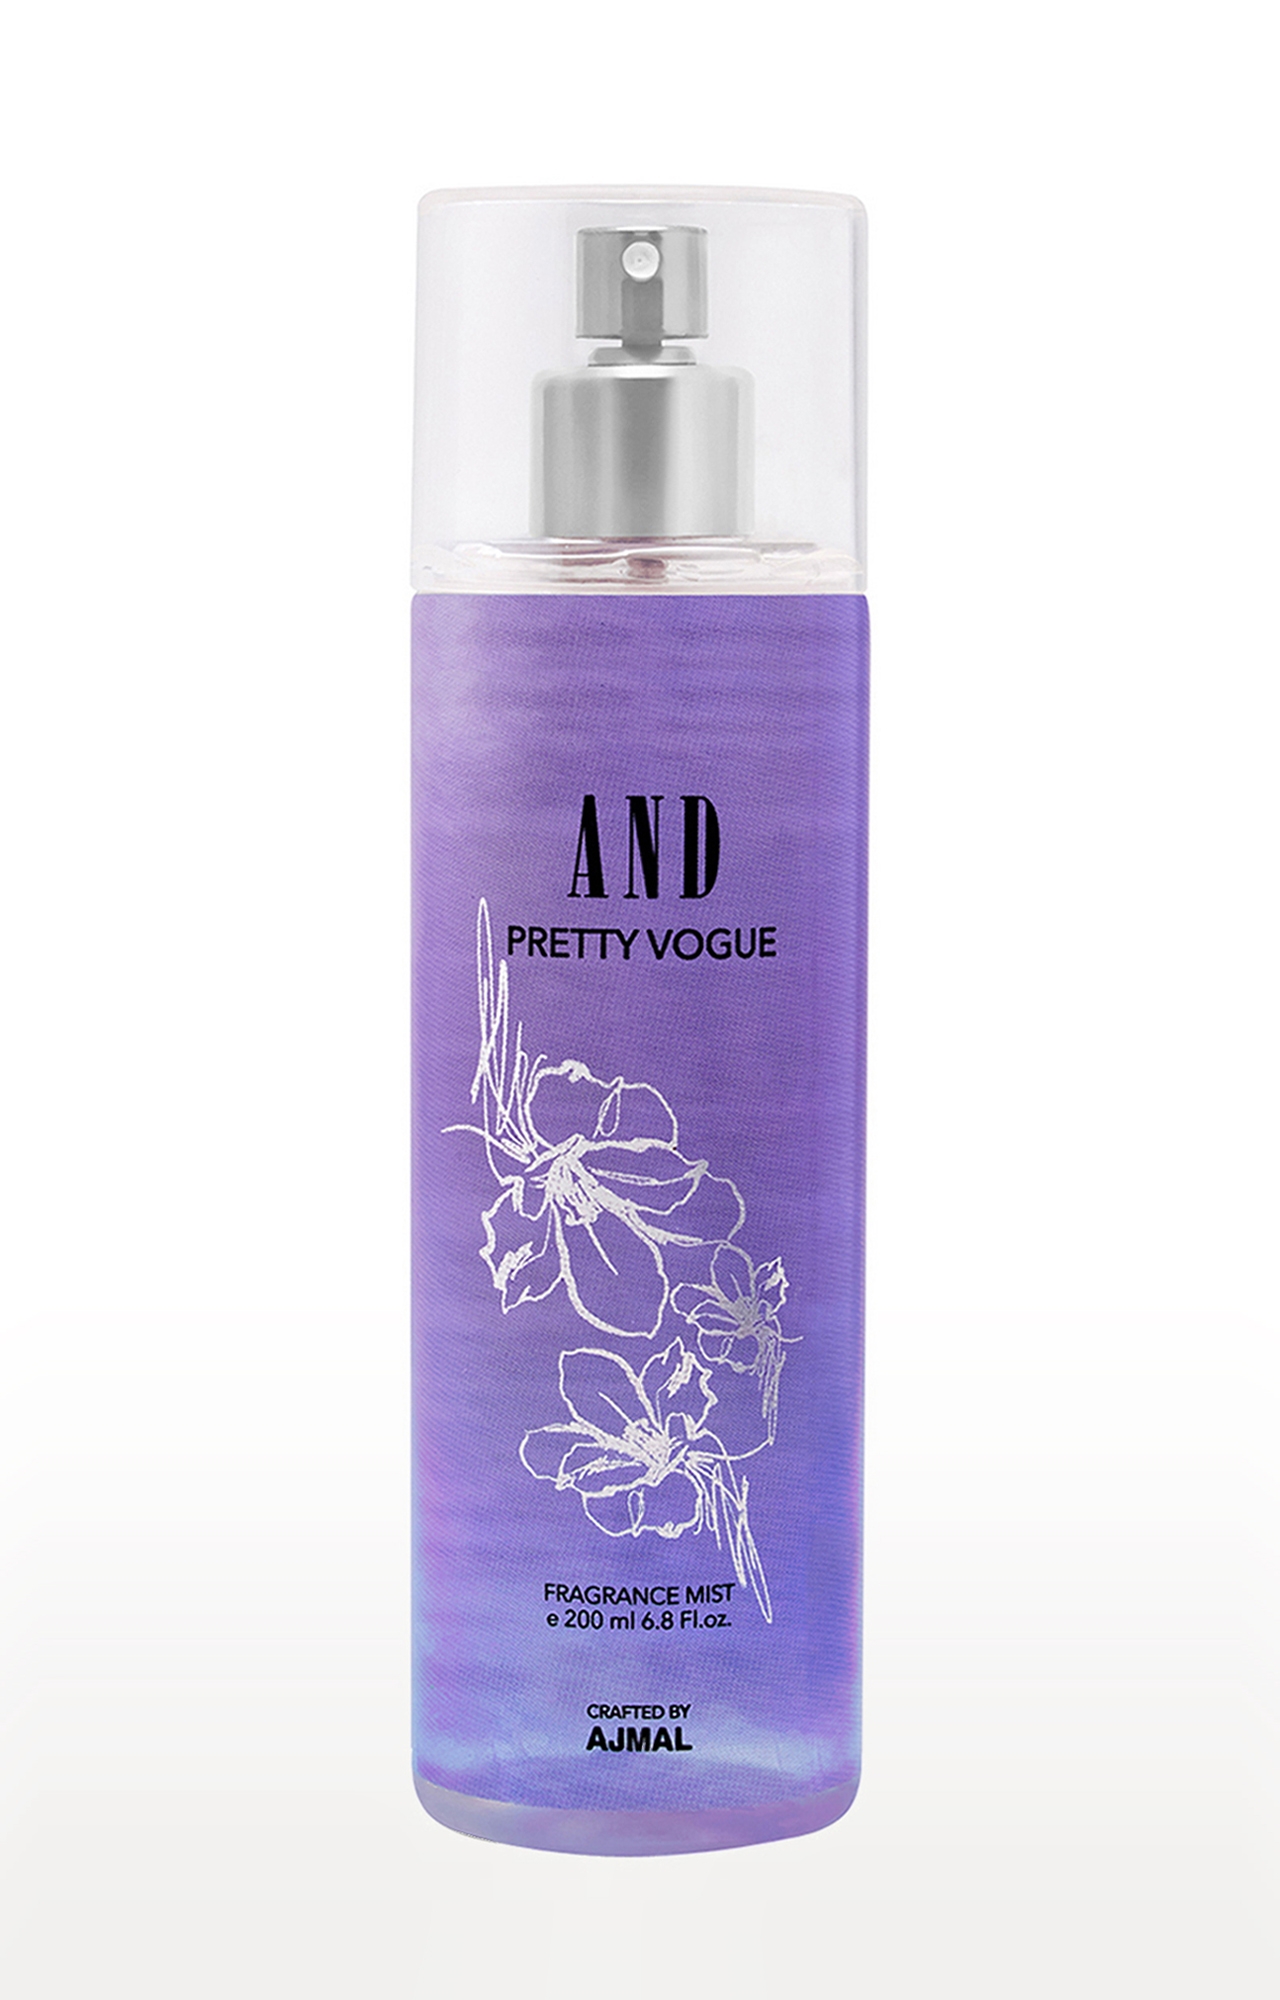 AND Crafted By Ajmal | AND Pretty Vogue Body Mist Perfume 200ML Long Lasting Scent Spray Gift For Women Crafted by Ajmal